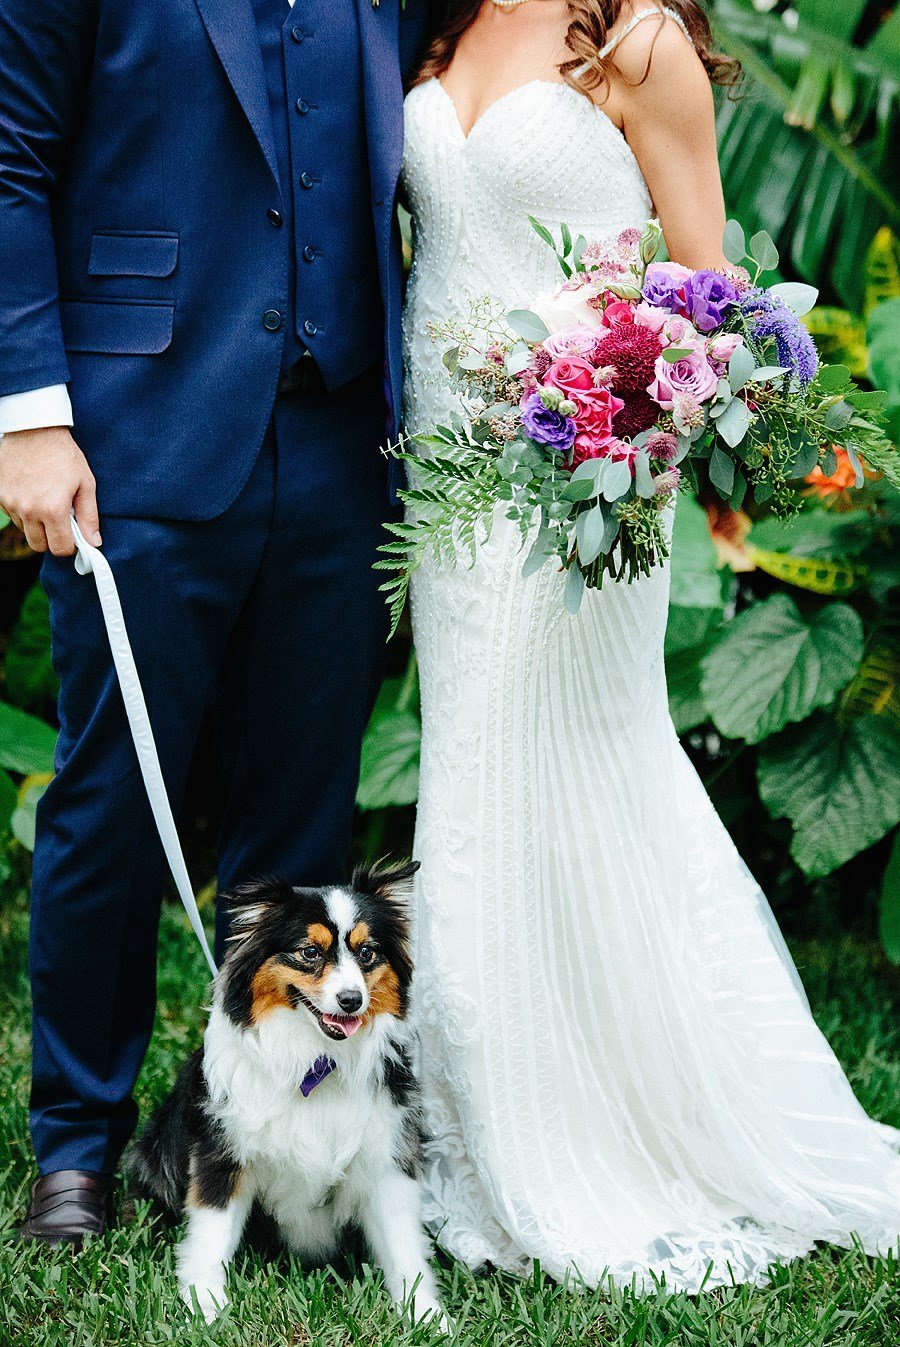 sundy house wedding couple with puppy